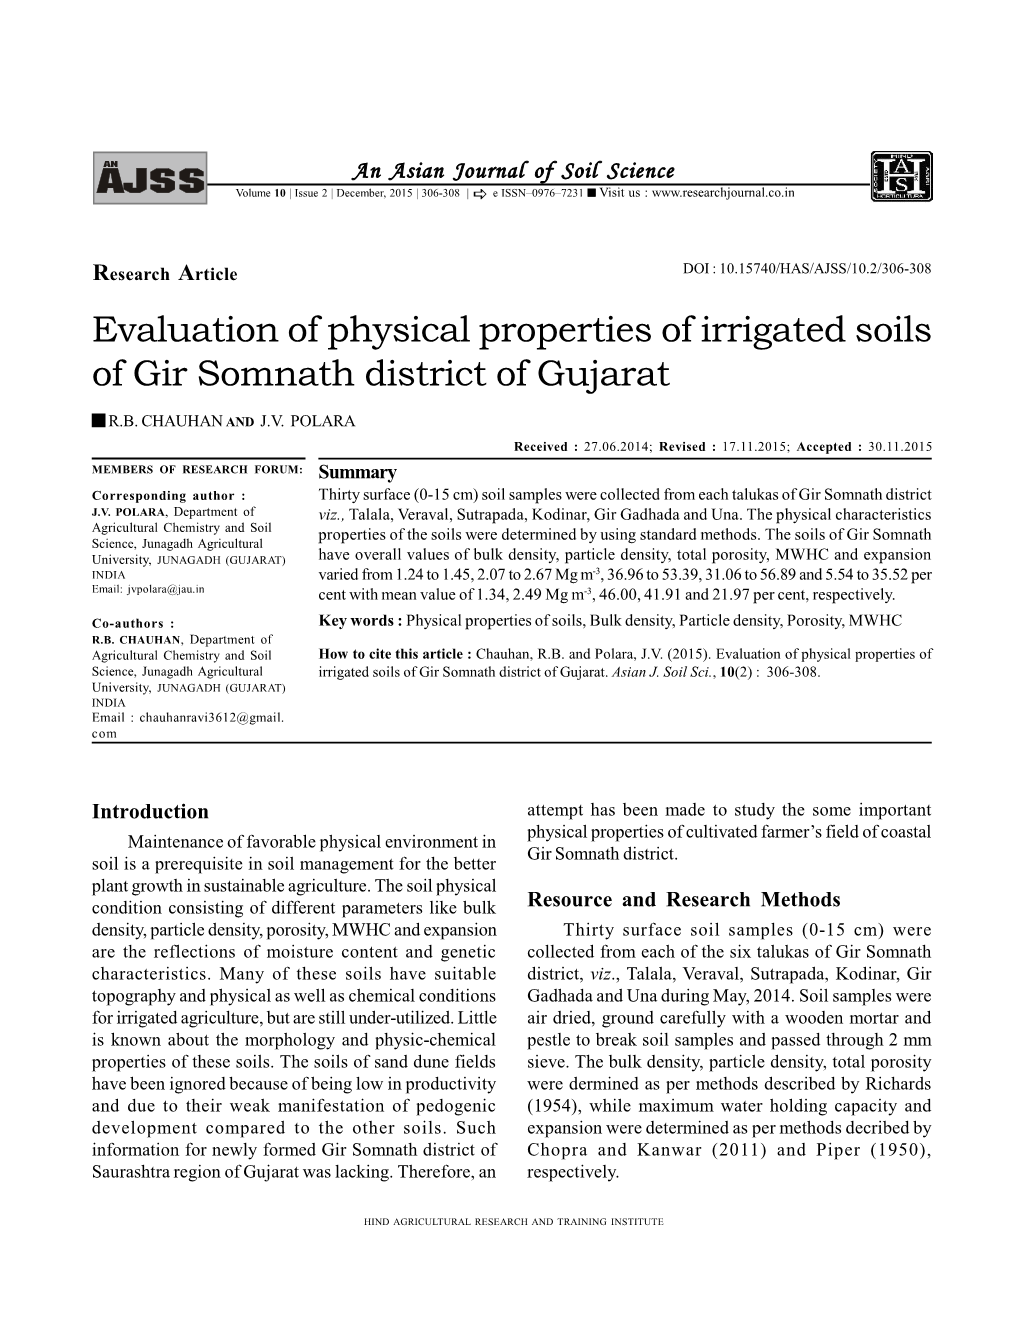 Evaluation of Physical Properties of Irrigated Soils of Gir Somnath District of Gujarat